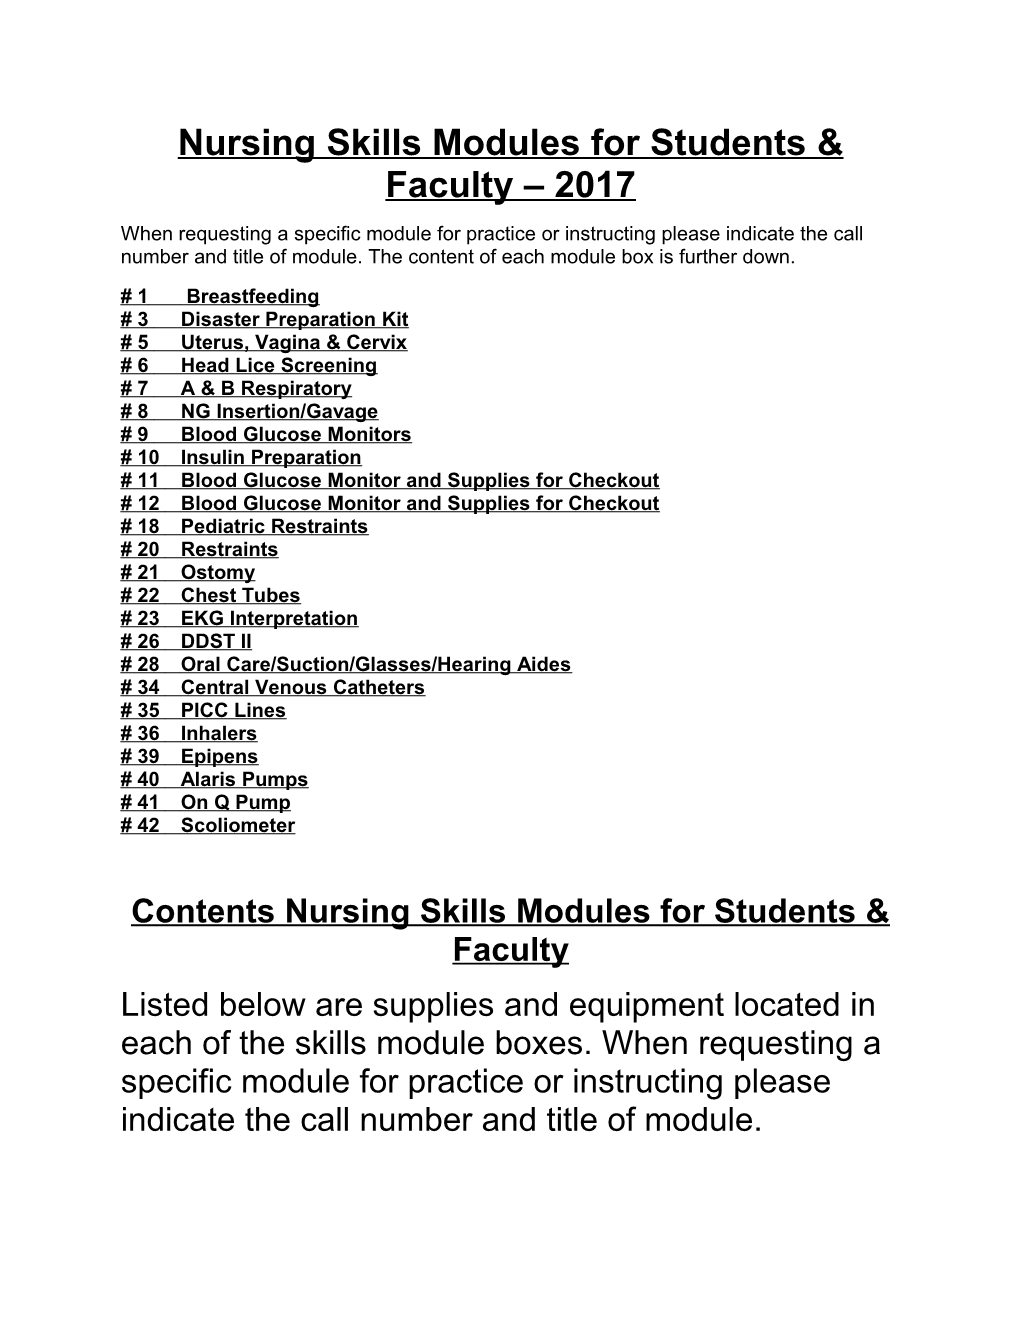 Nursing Skills Modules for Students & Faculty 2017